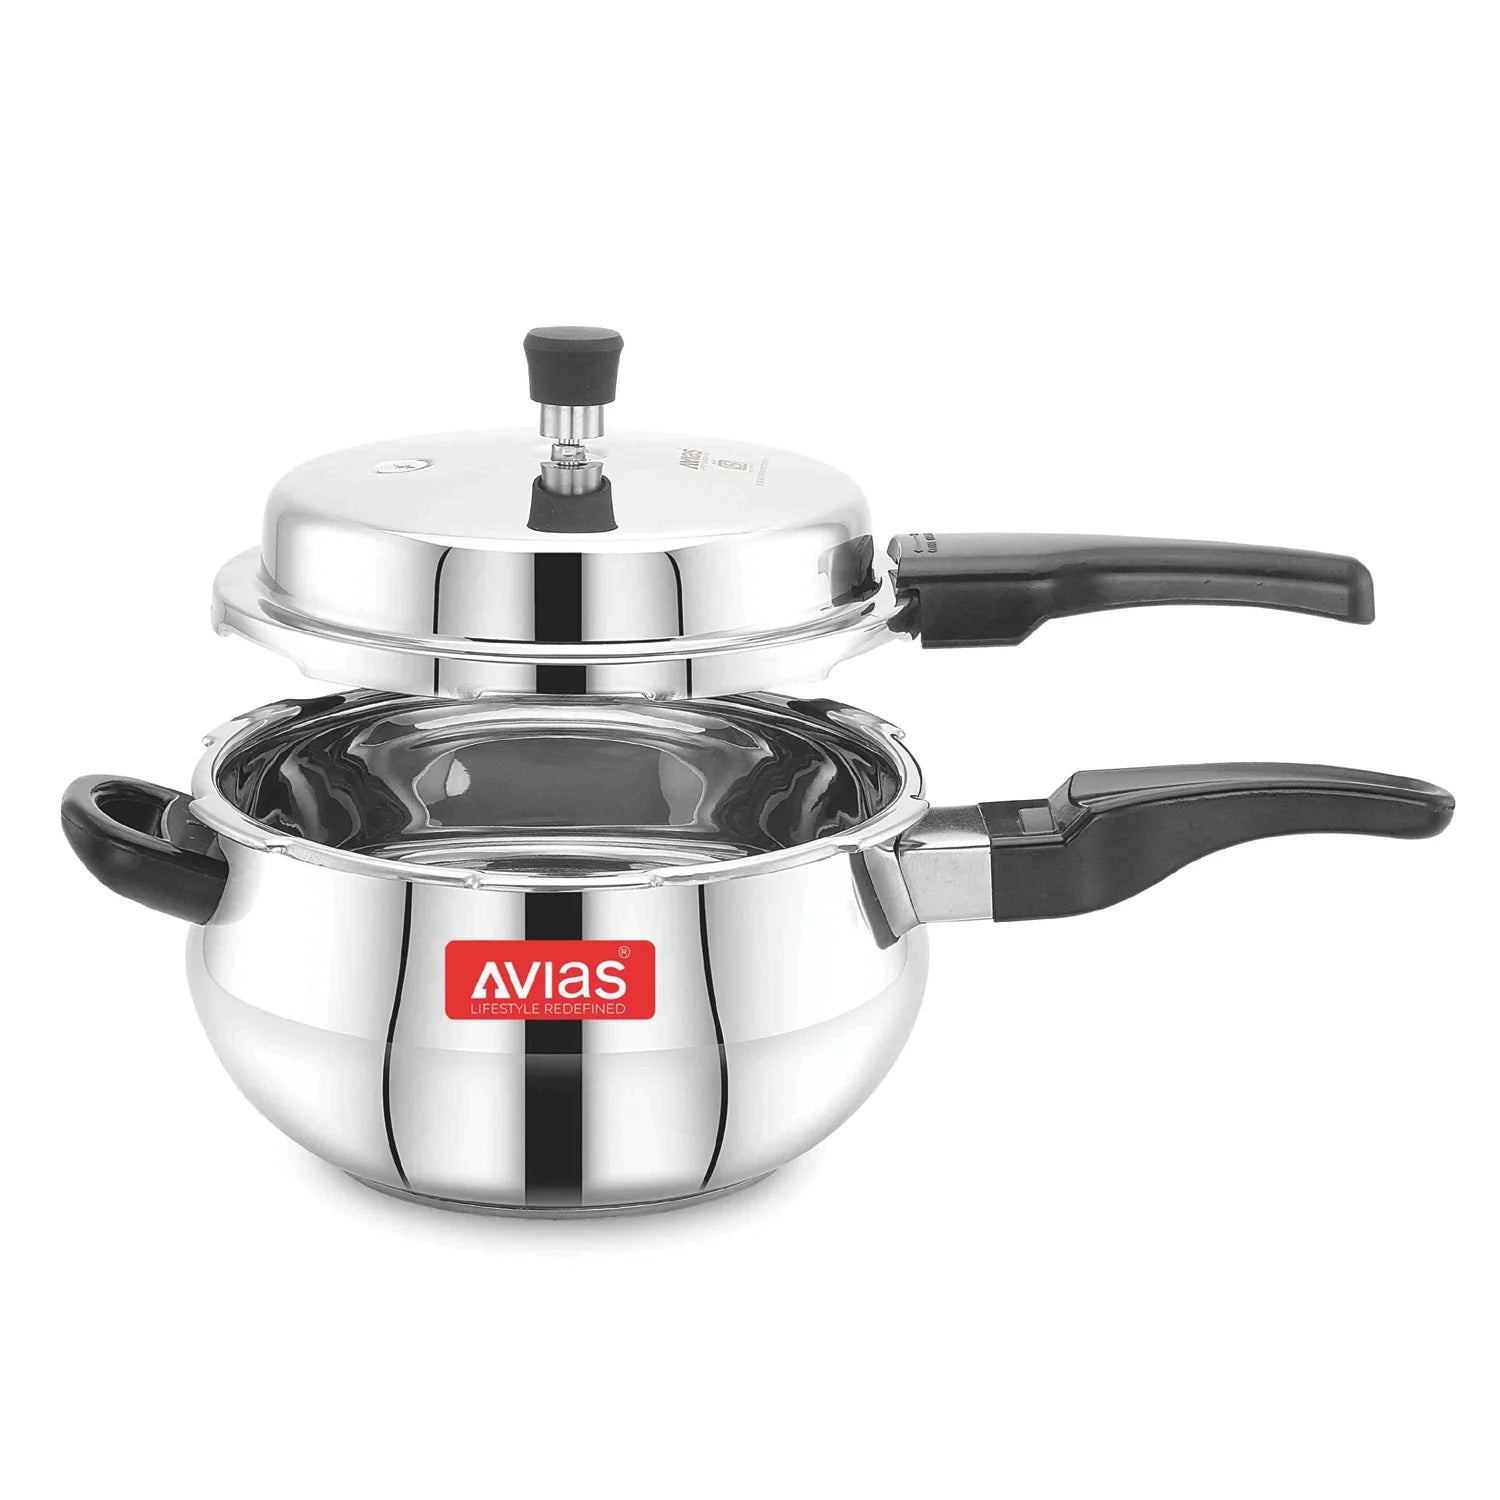 AVIAS Avanti Handi high-quality stainless steel pressure cooker with outer lid open